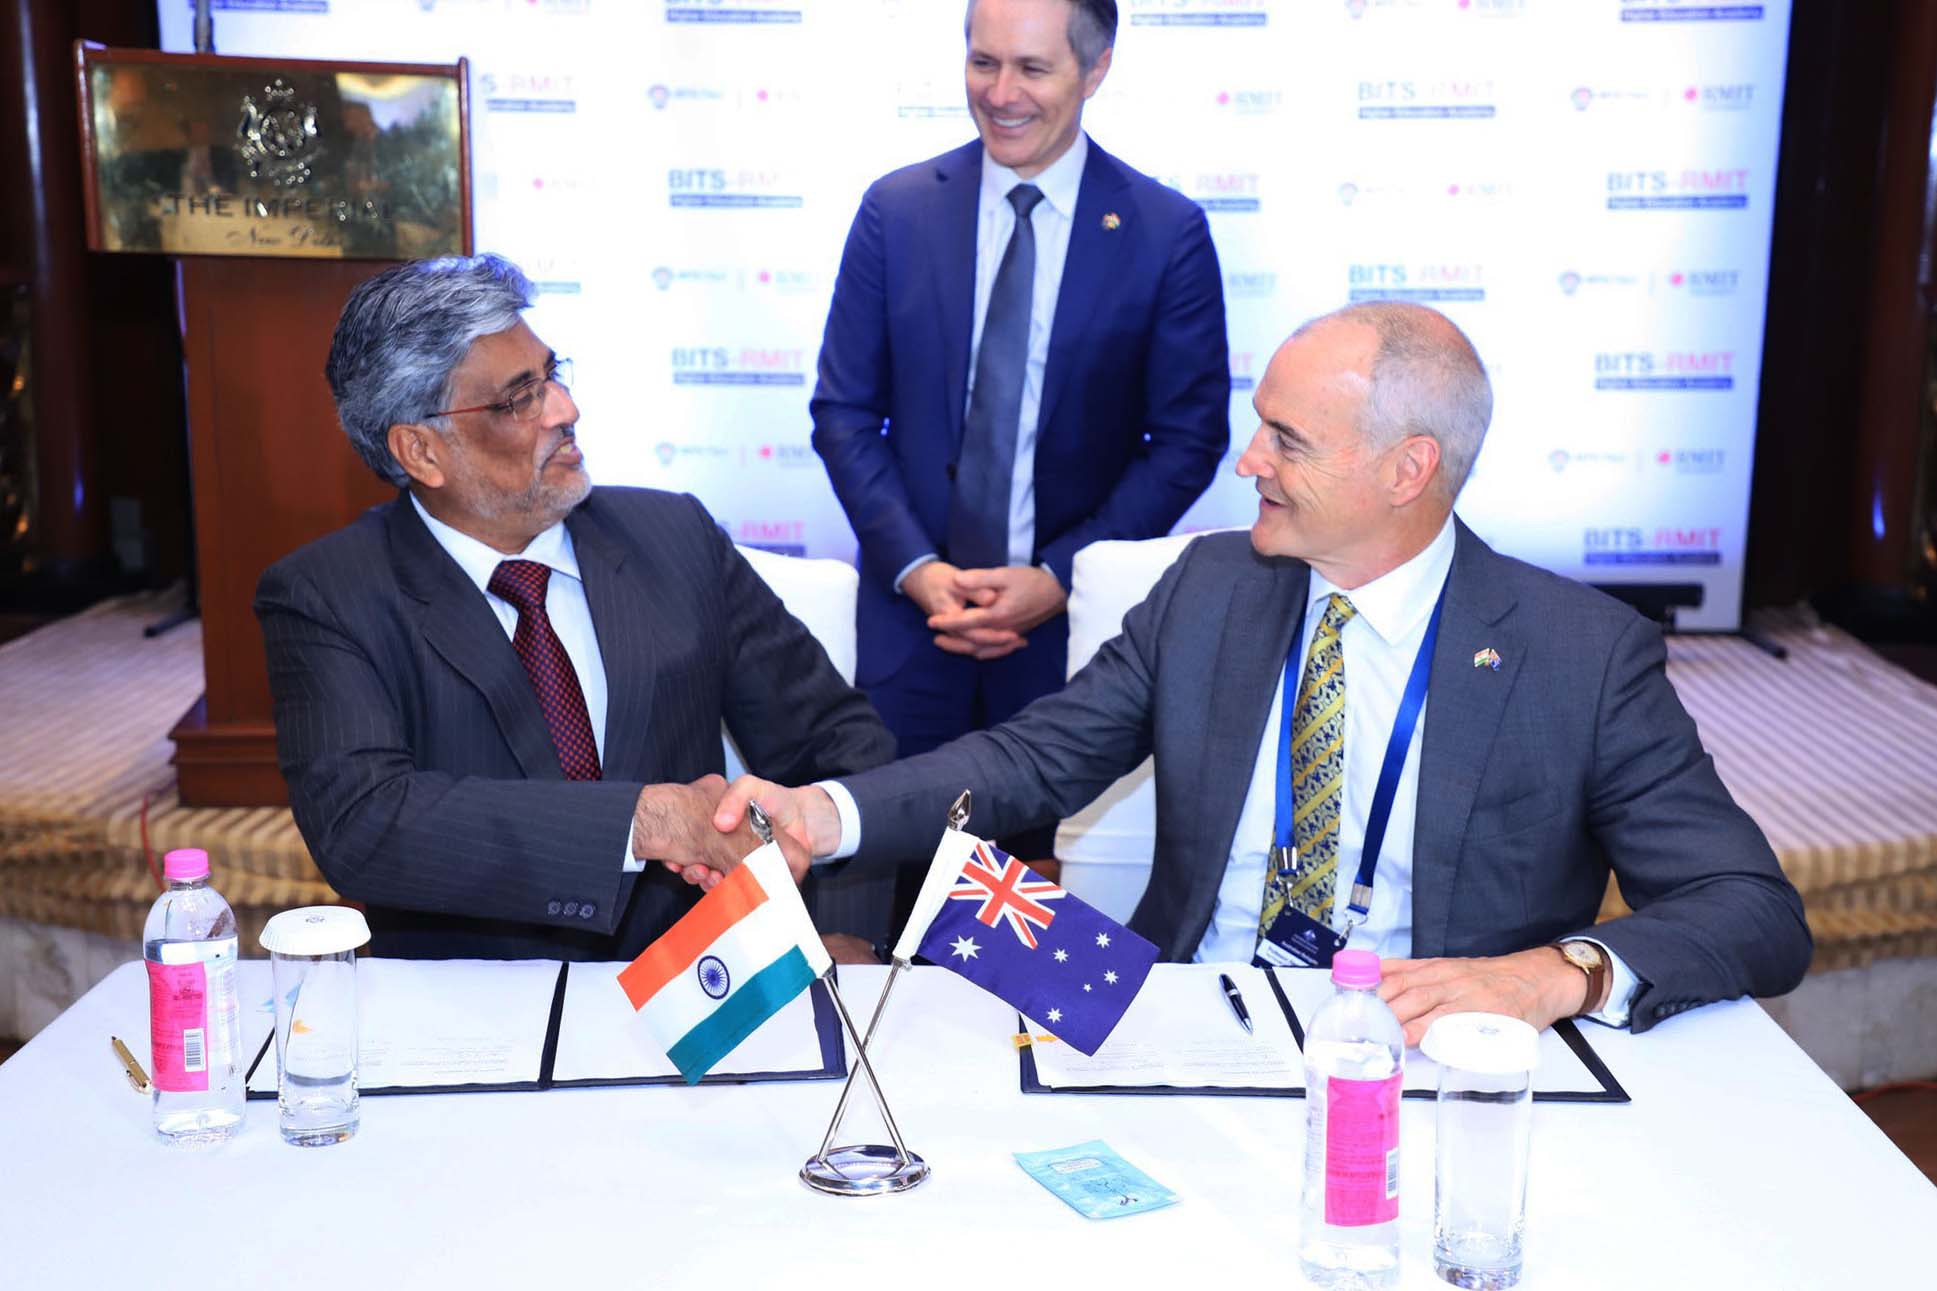 Prof Souvik Bhattacharya BITS Vice-Chancellor and Prof Alec Cameron RMIT Vice-Chancellor and President shake hands while sitting at a desk. Hon. Jason Clare MP Federal Minister for Education watches and smiles.